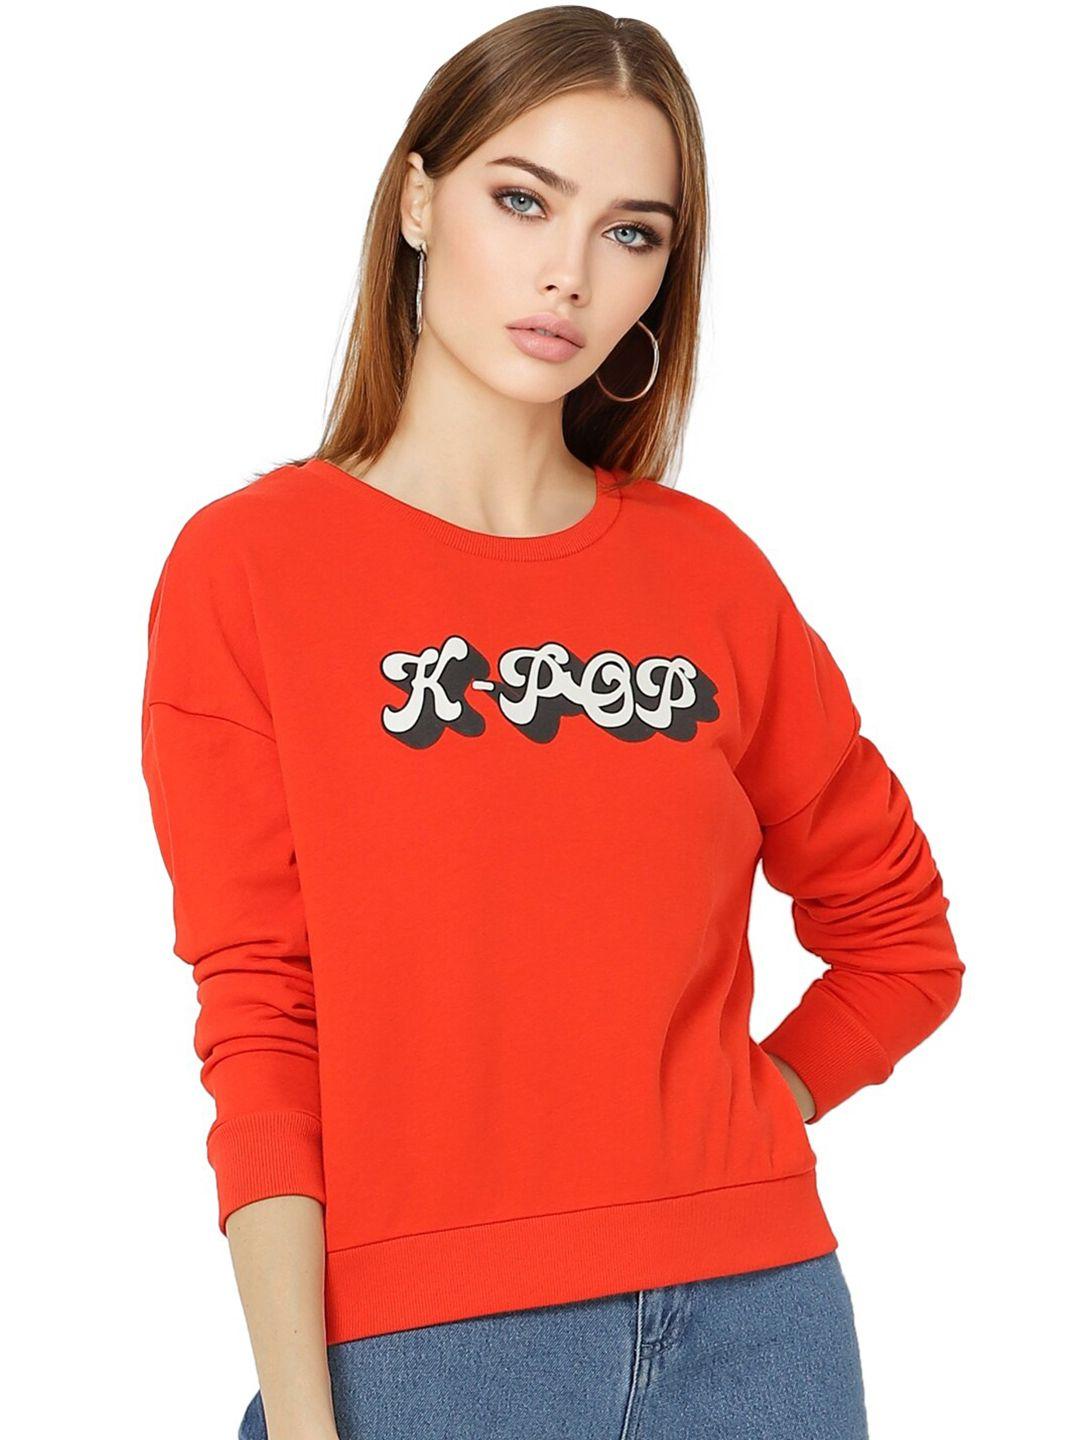 only-women-red-typography-printed-cotton-sweatshirts